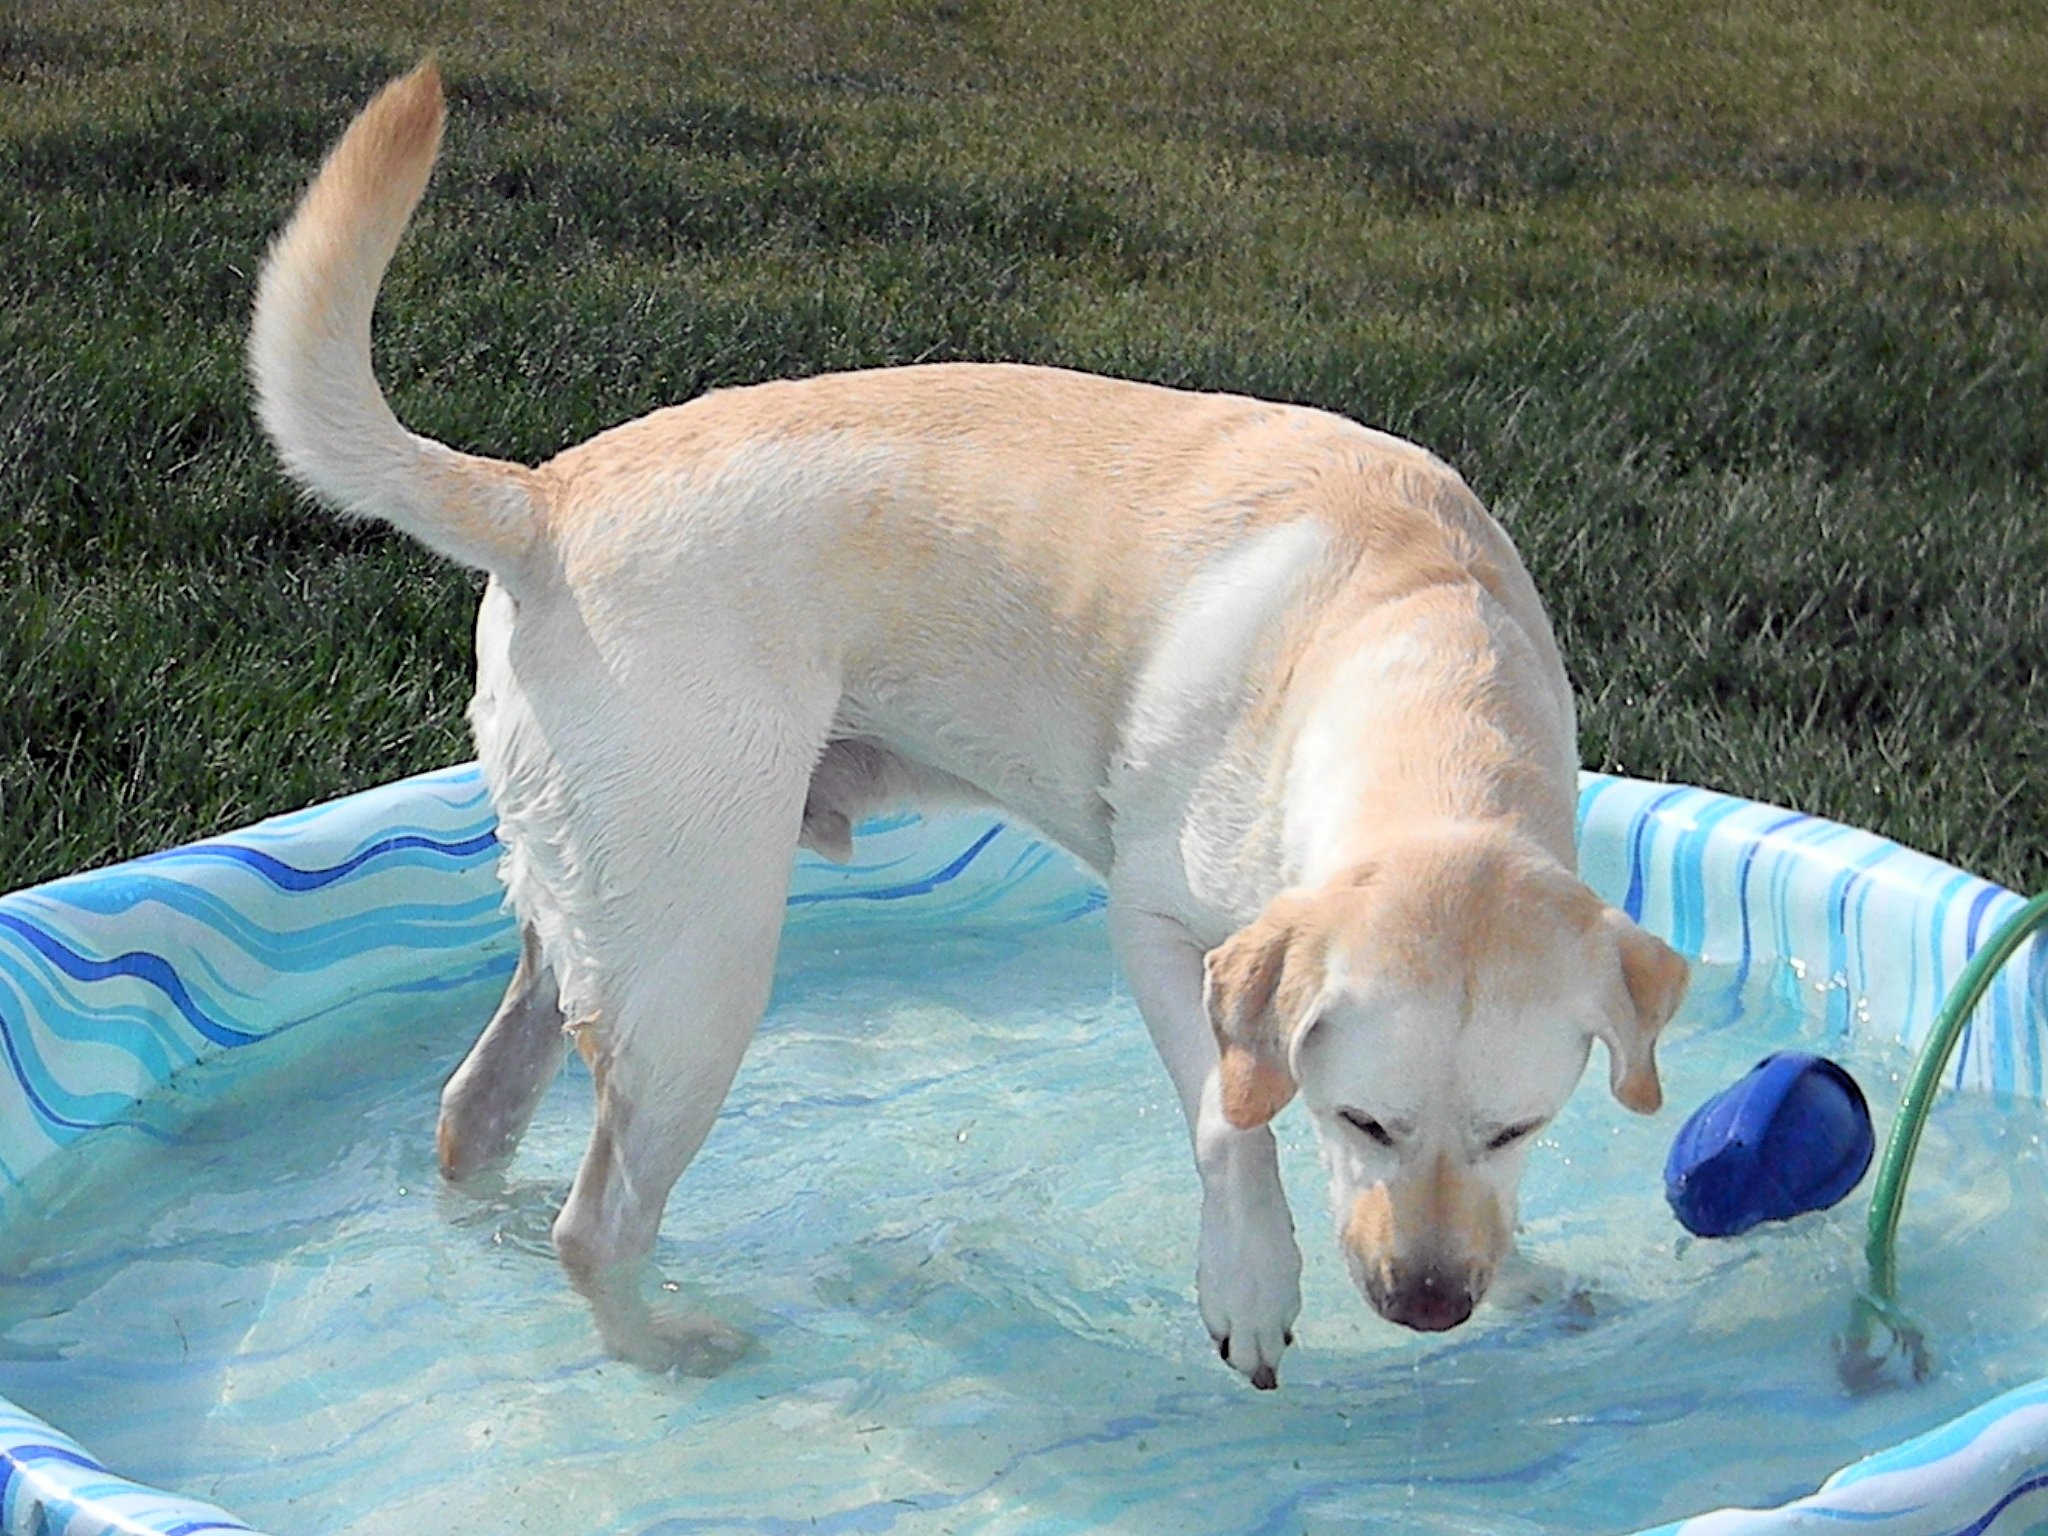 Indignant Puppy Goes Berserk When Items Are Thrown in His Pool in Hilarious Video clip